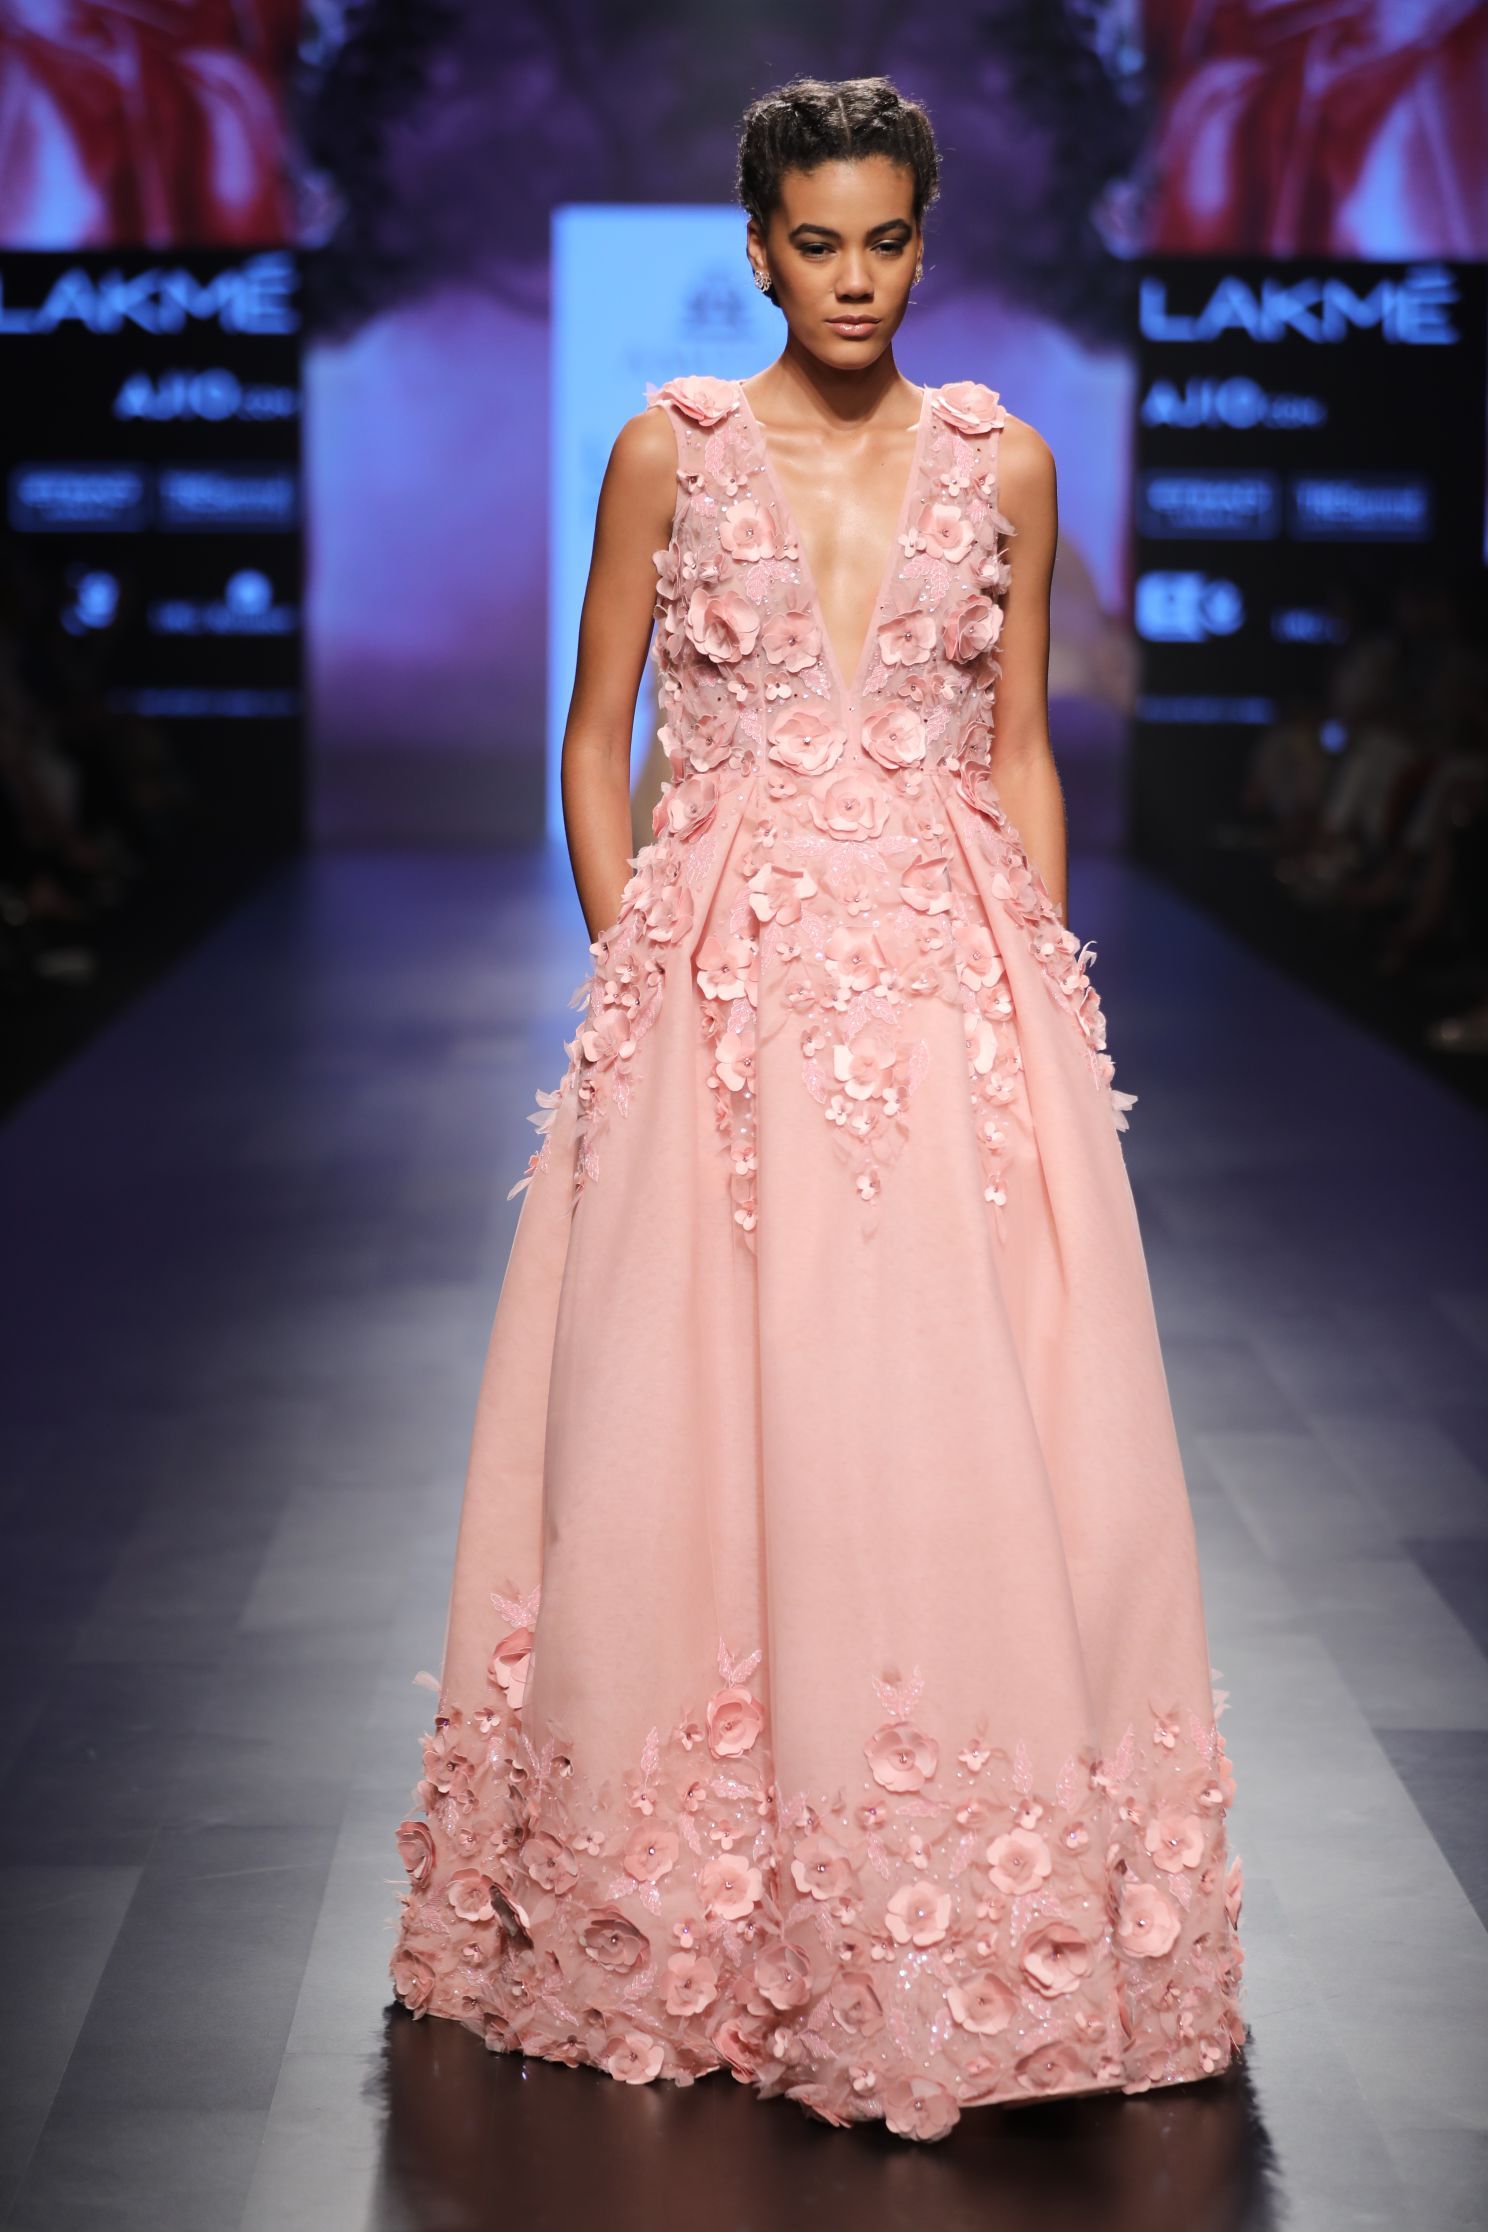 Amit GT - Pink ball gown with 3d flowers